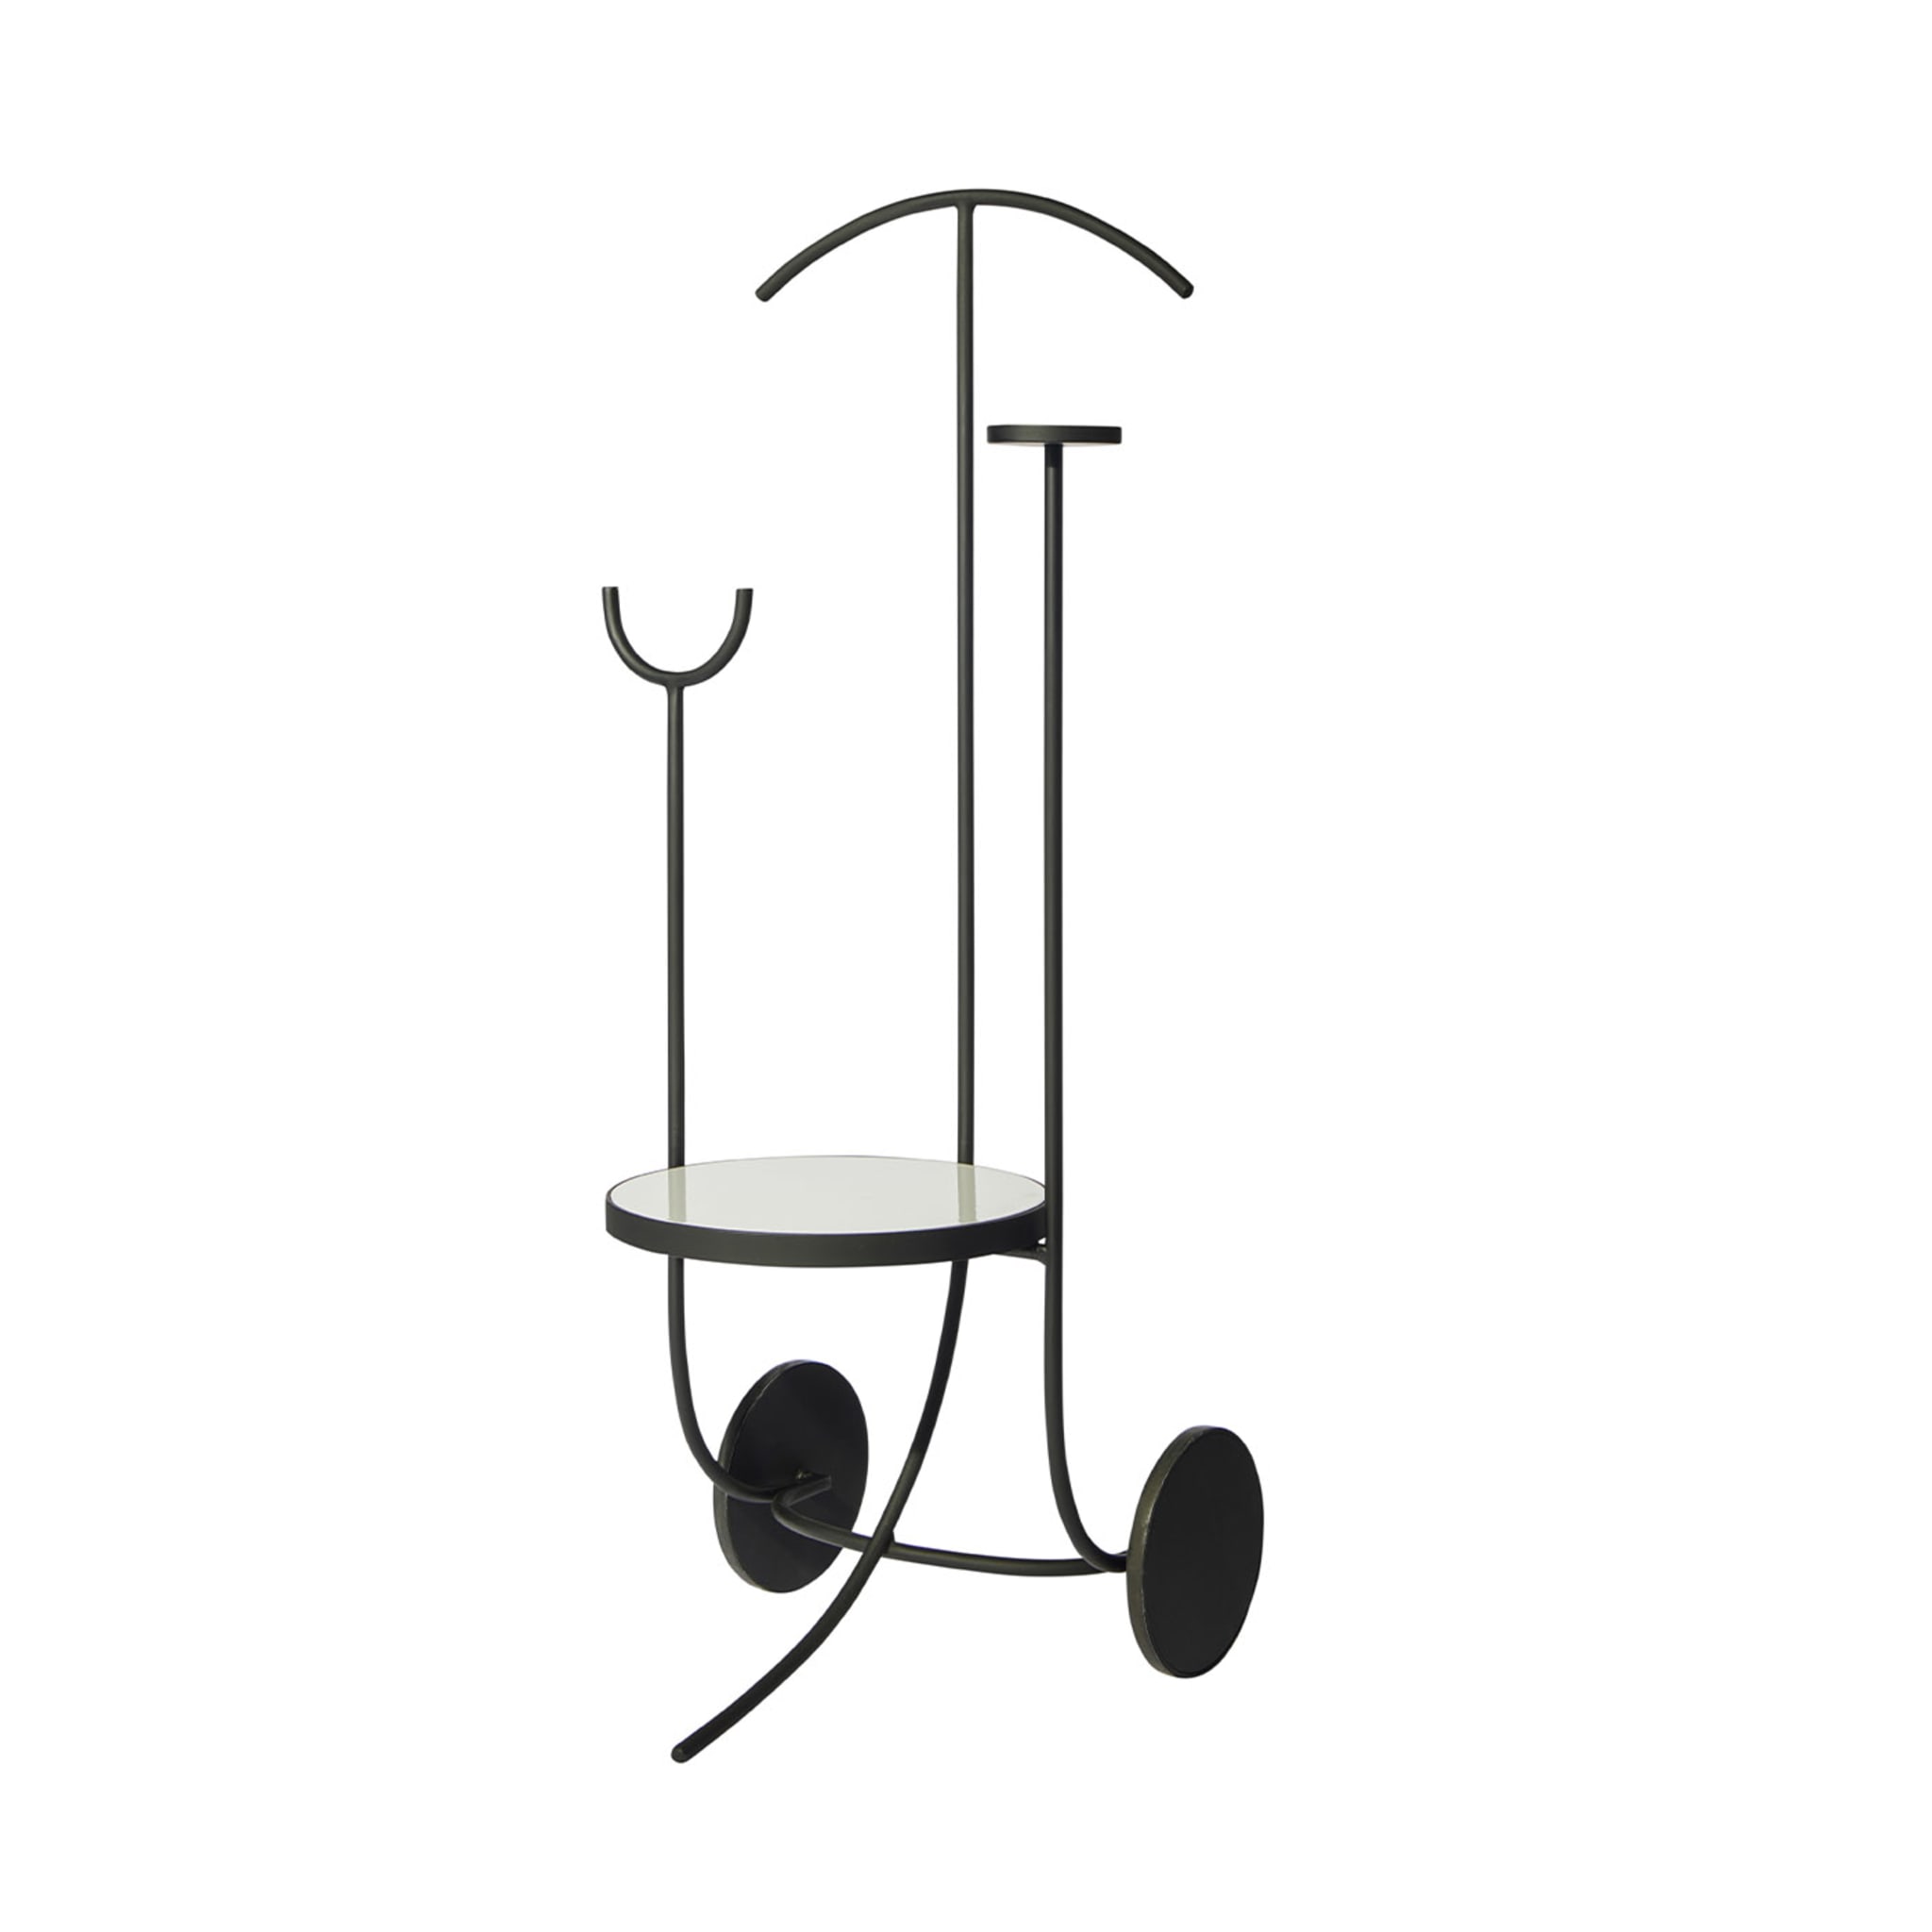 Amonì Valet Stand Limited Edition by Linda Salvatori Limited Edition - Alternative view 1